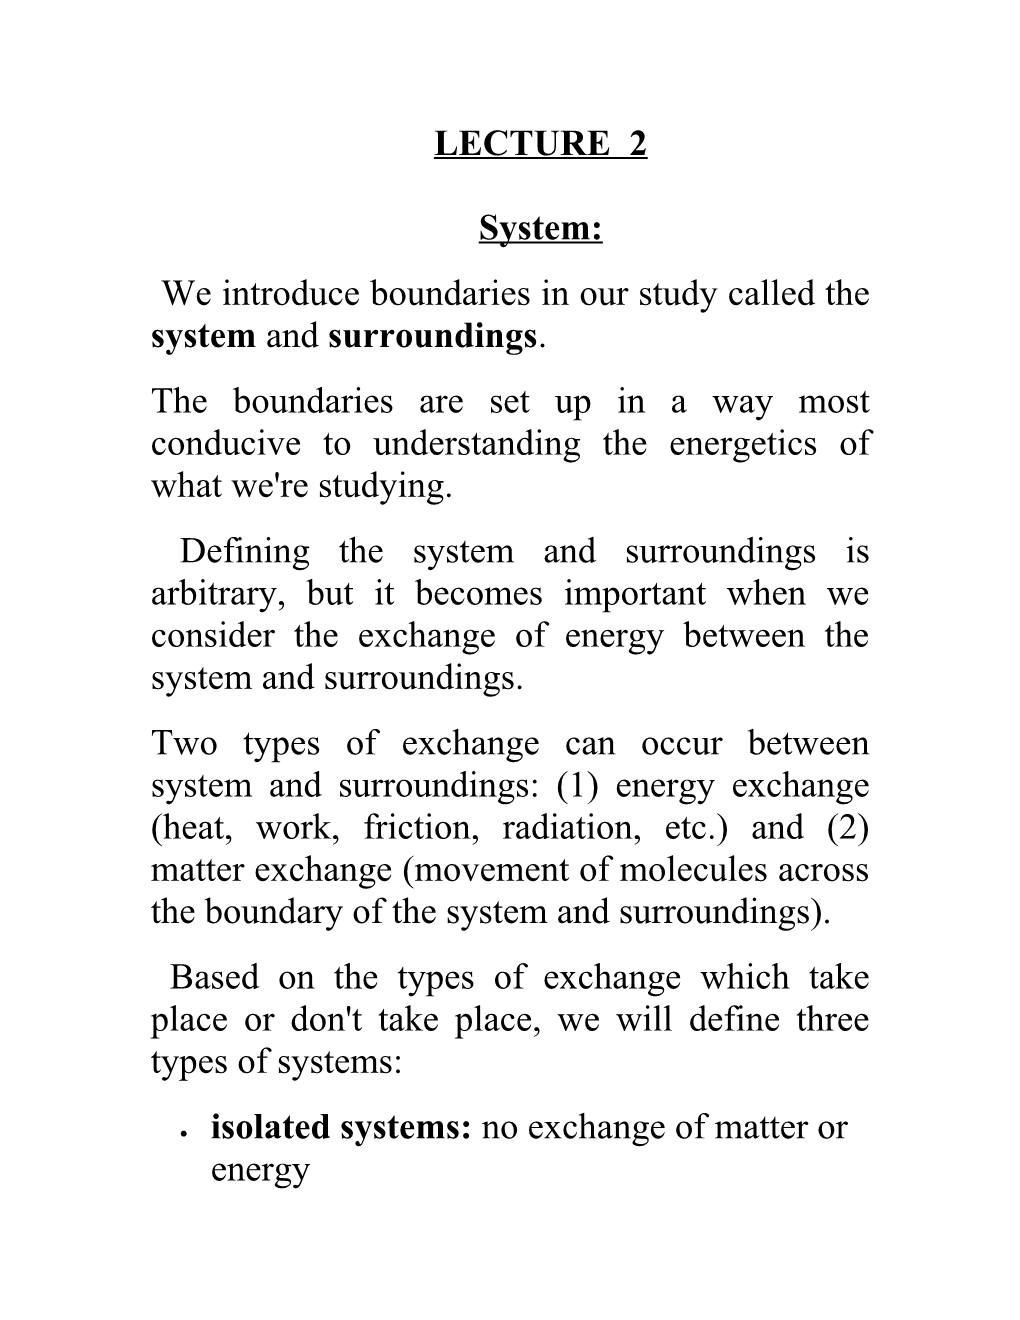 We Introduce Boundaries in Our Study Called the System and Surroundings